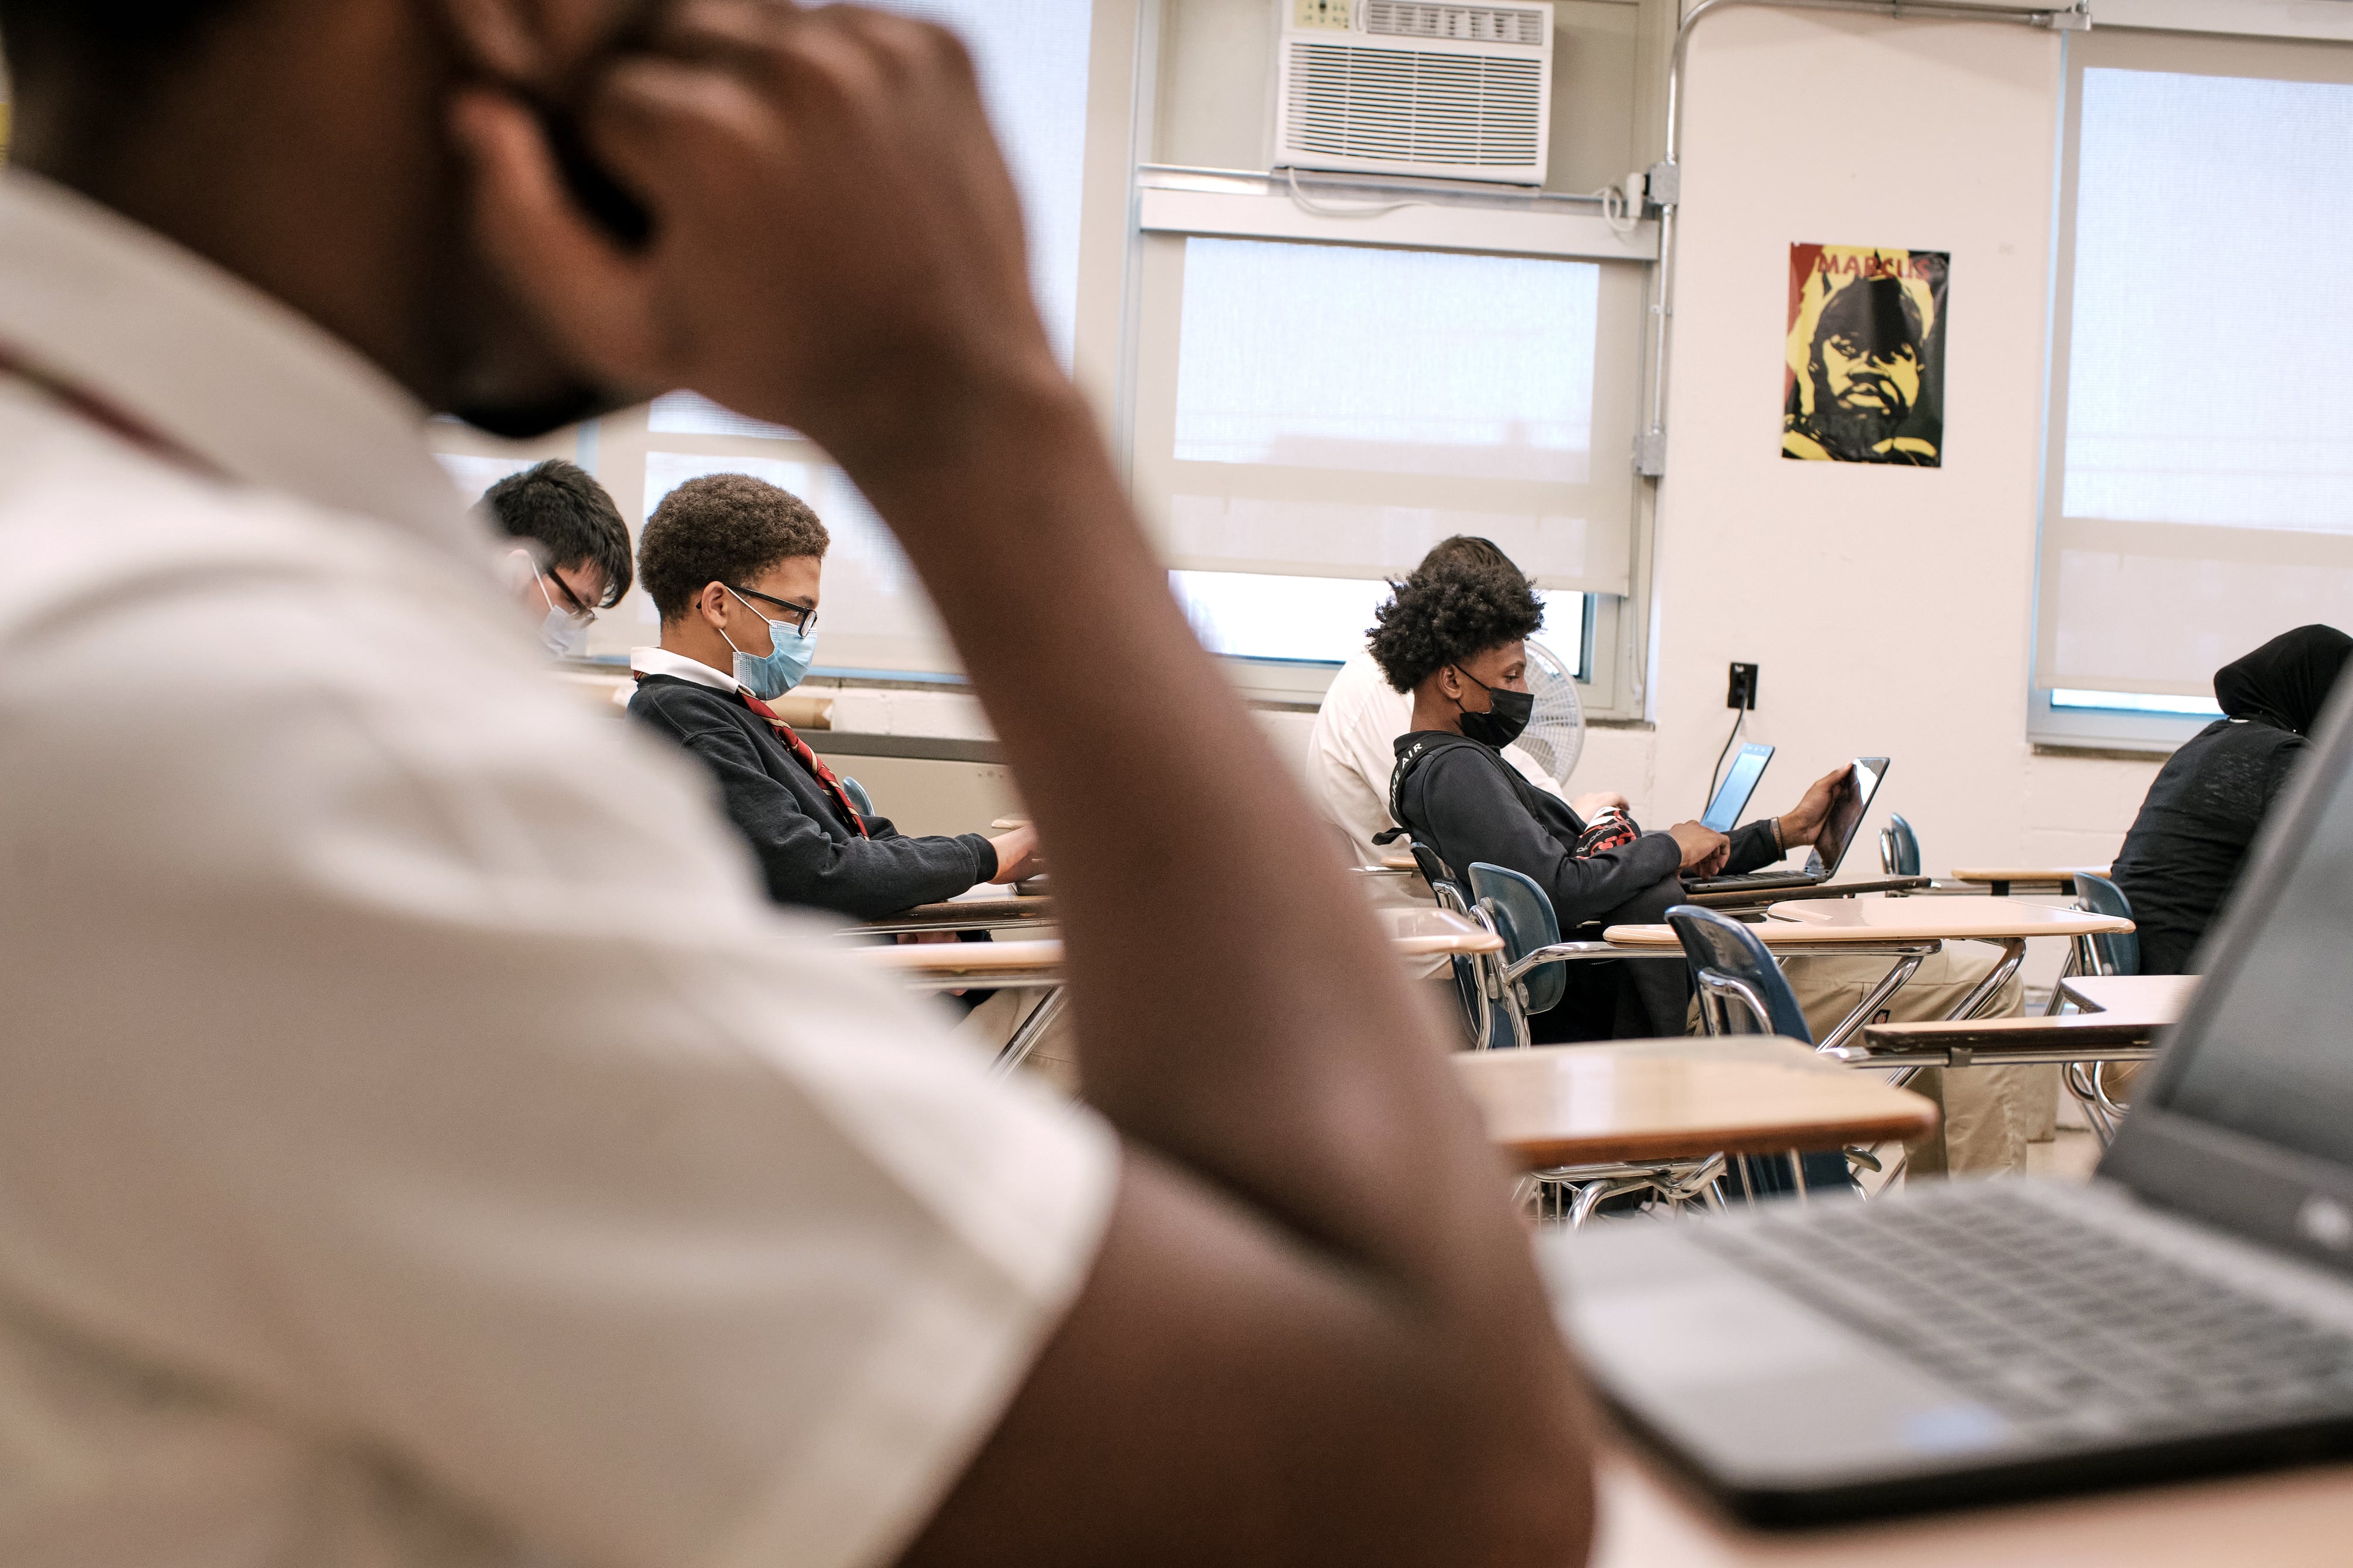 A couple of high school students wearing masks and sitting at their desks in a classroom all have a laptop in front of them with windows on the back wall in the background.